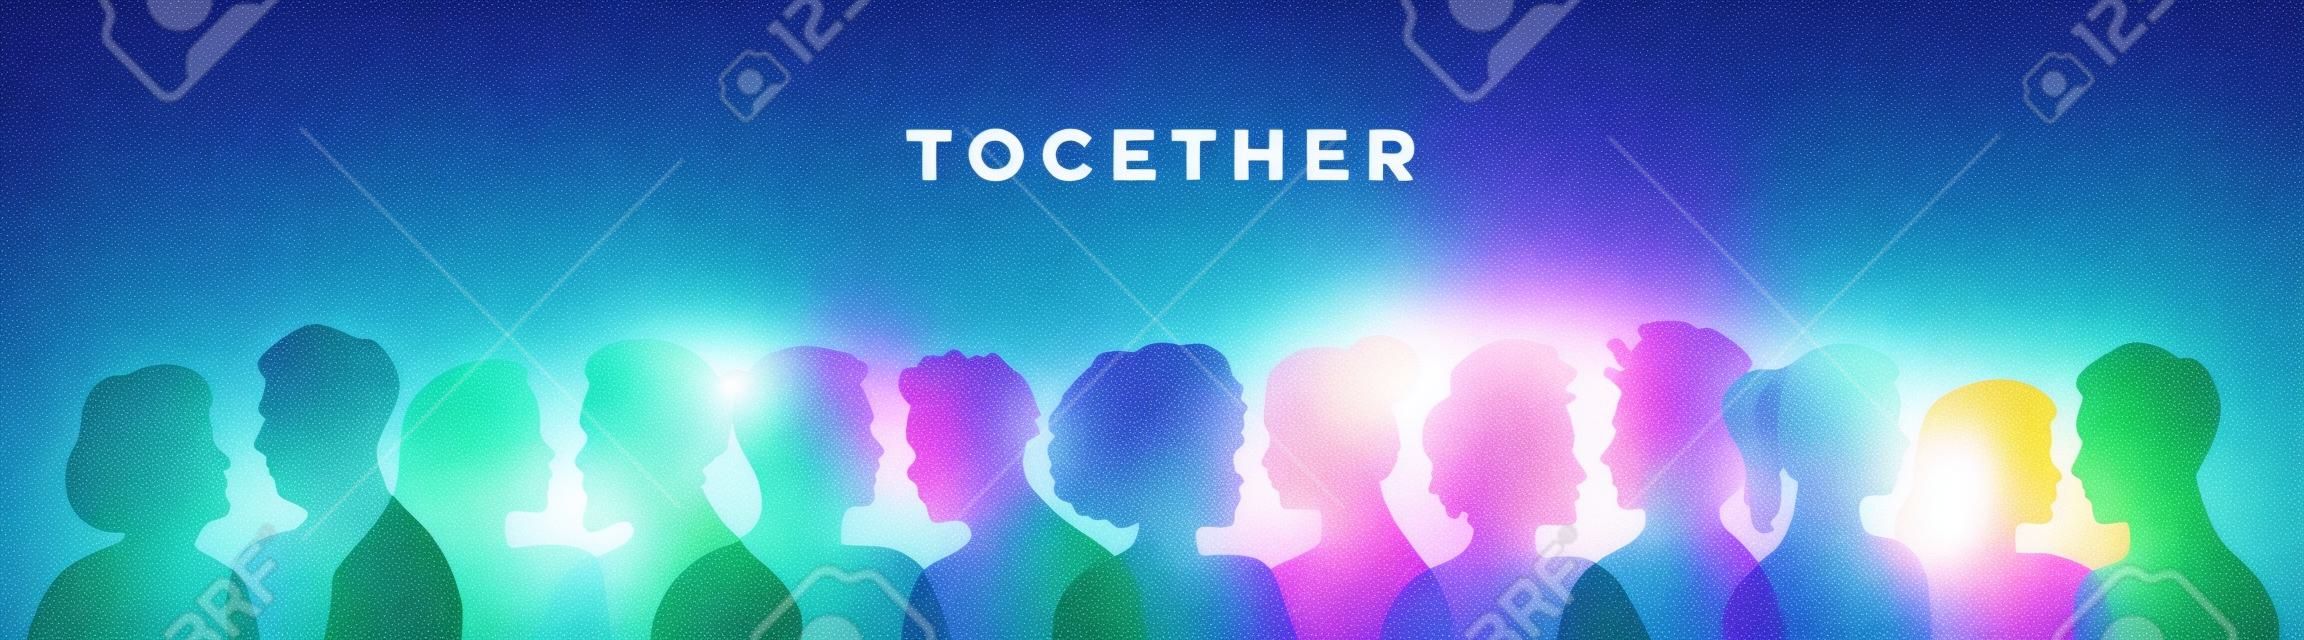 Together colorful quote illustration with diverse silhouette people faces in transparent color design. Ethnic character team flat cartoon for unity or community help concept social media banner.